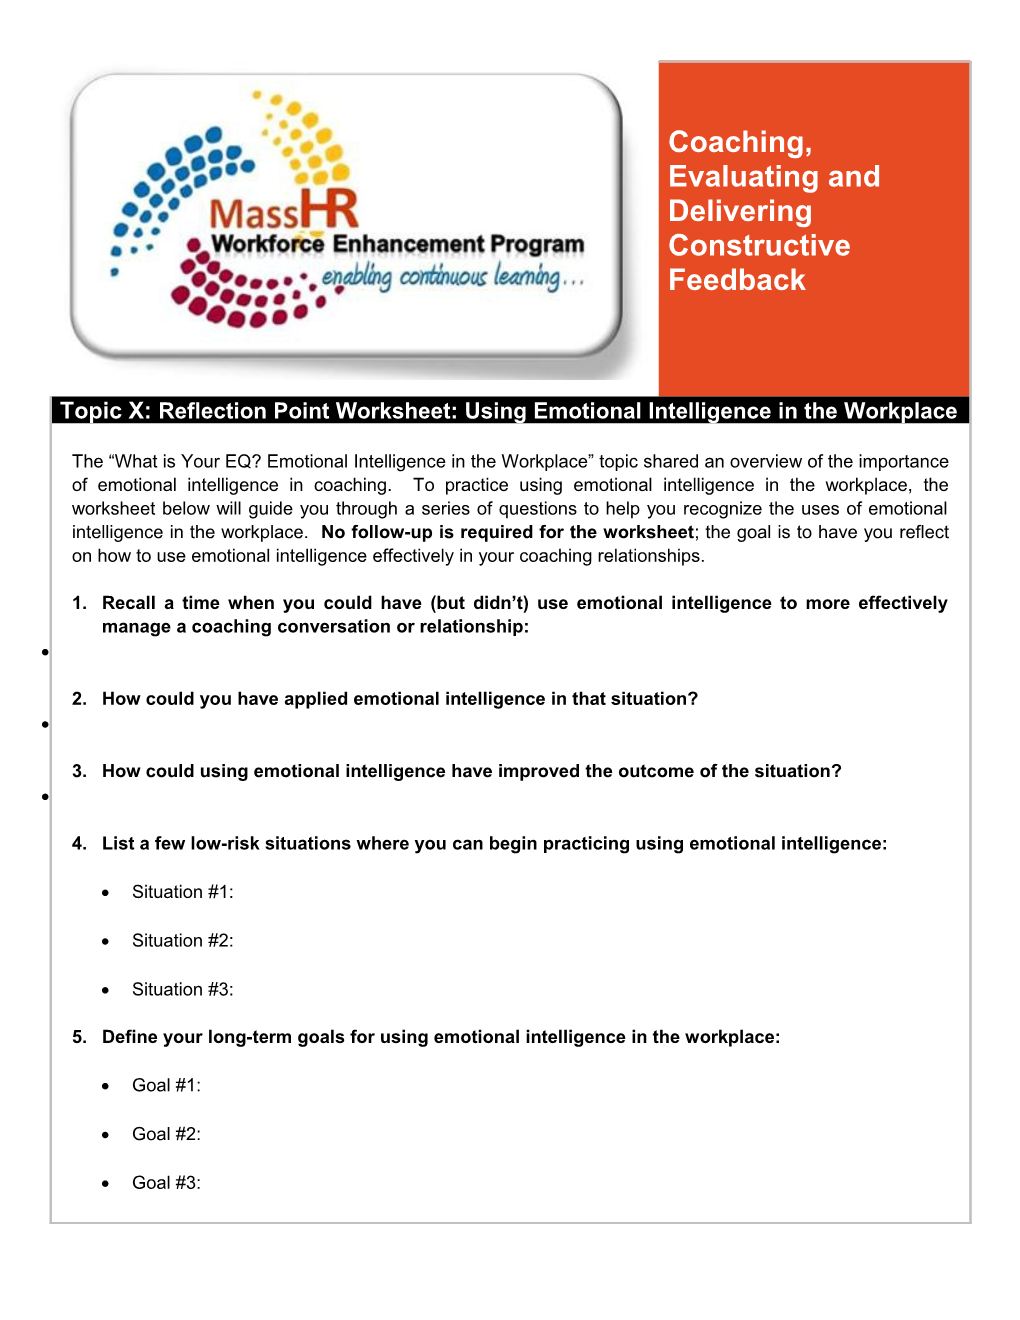 Topic X: Reflection Point Worksheet: Using Emotional Intelligence In The Workplace